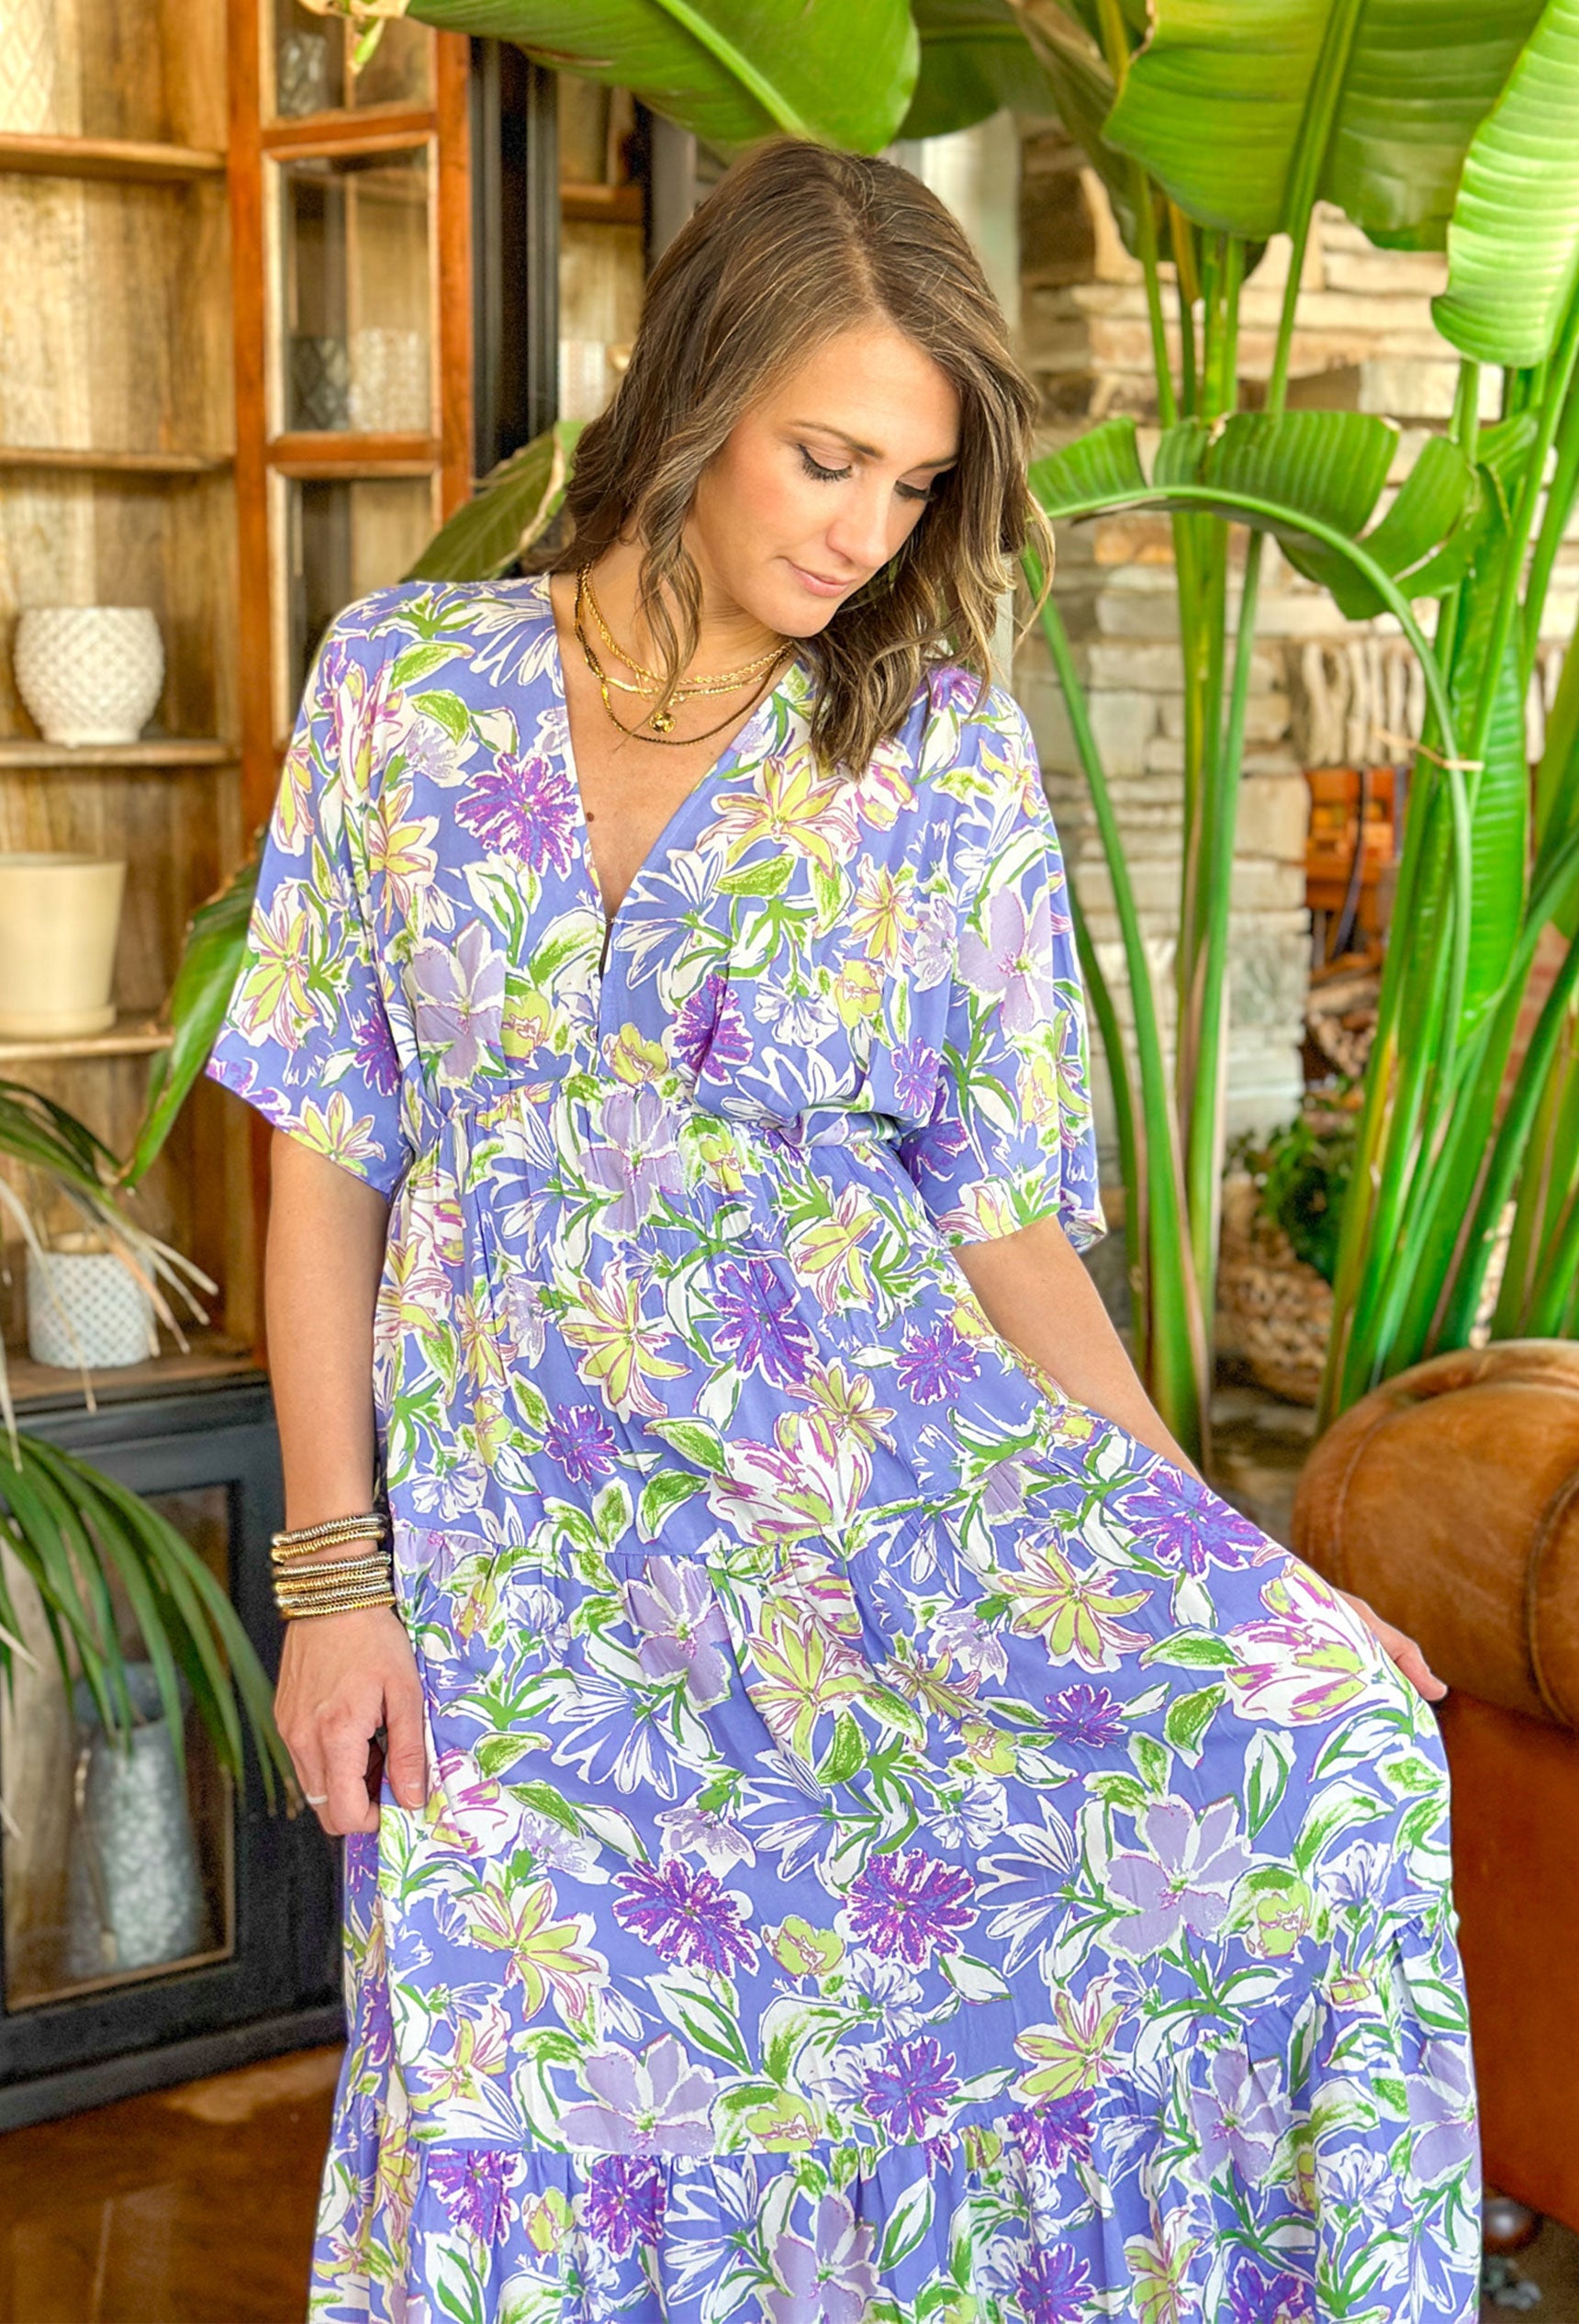 Spring Dream Floral Maxi Dress, short sleeve maxi dress in lavender with lilac and purple flowers with white and yellow details and green leaves